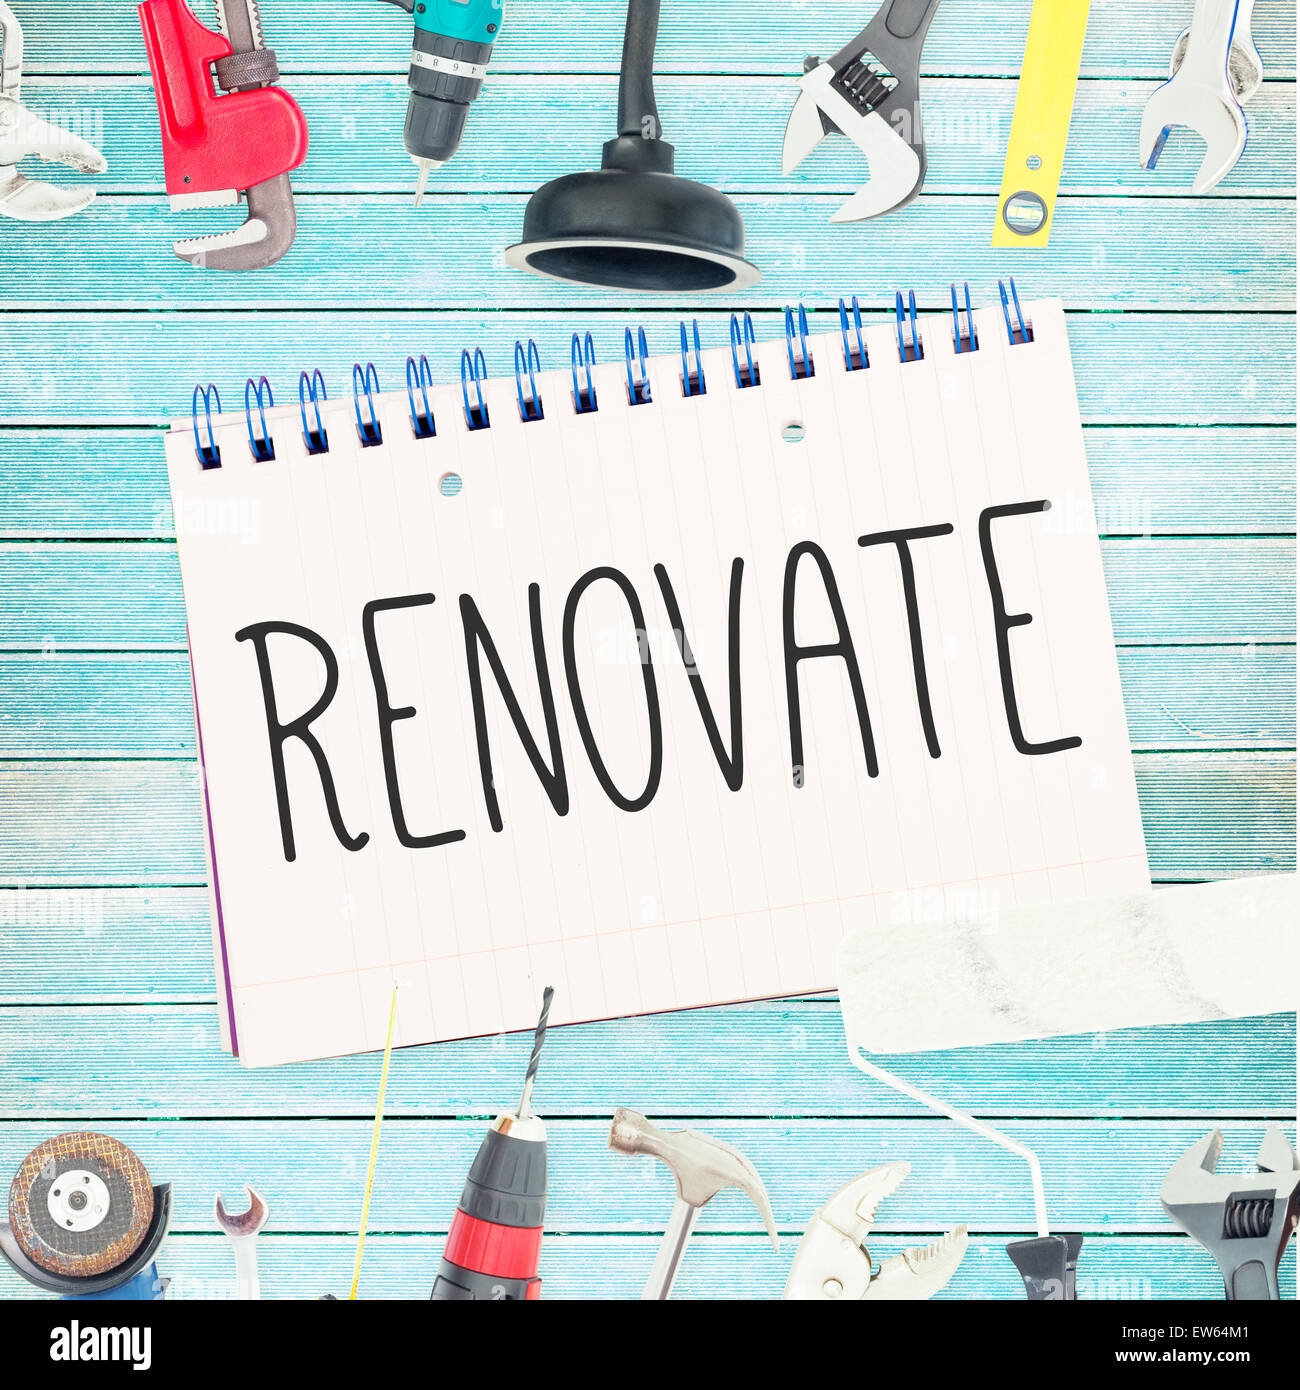 Renovate  against tools and notepad on wooden background Stock Photo